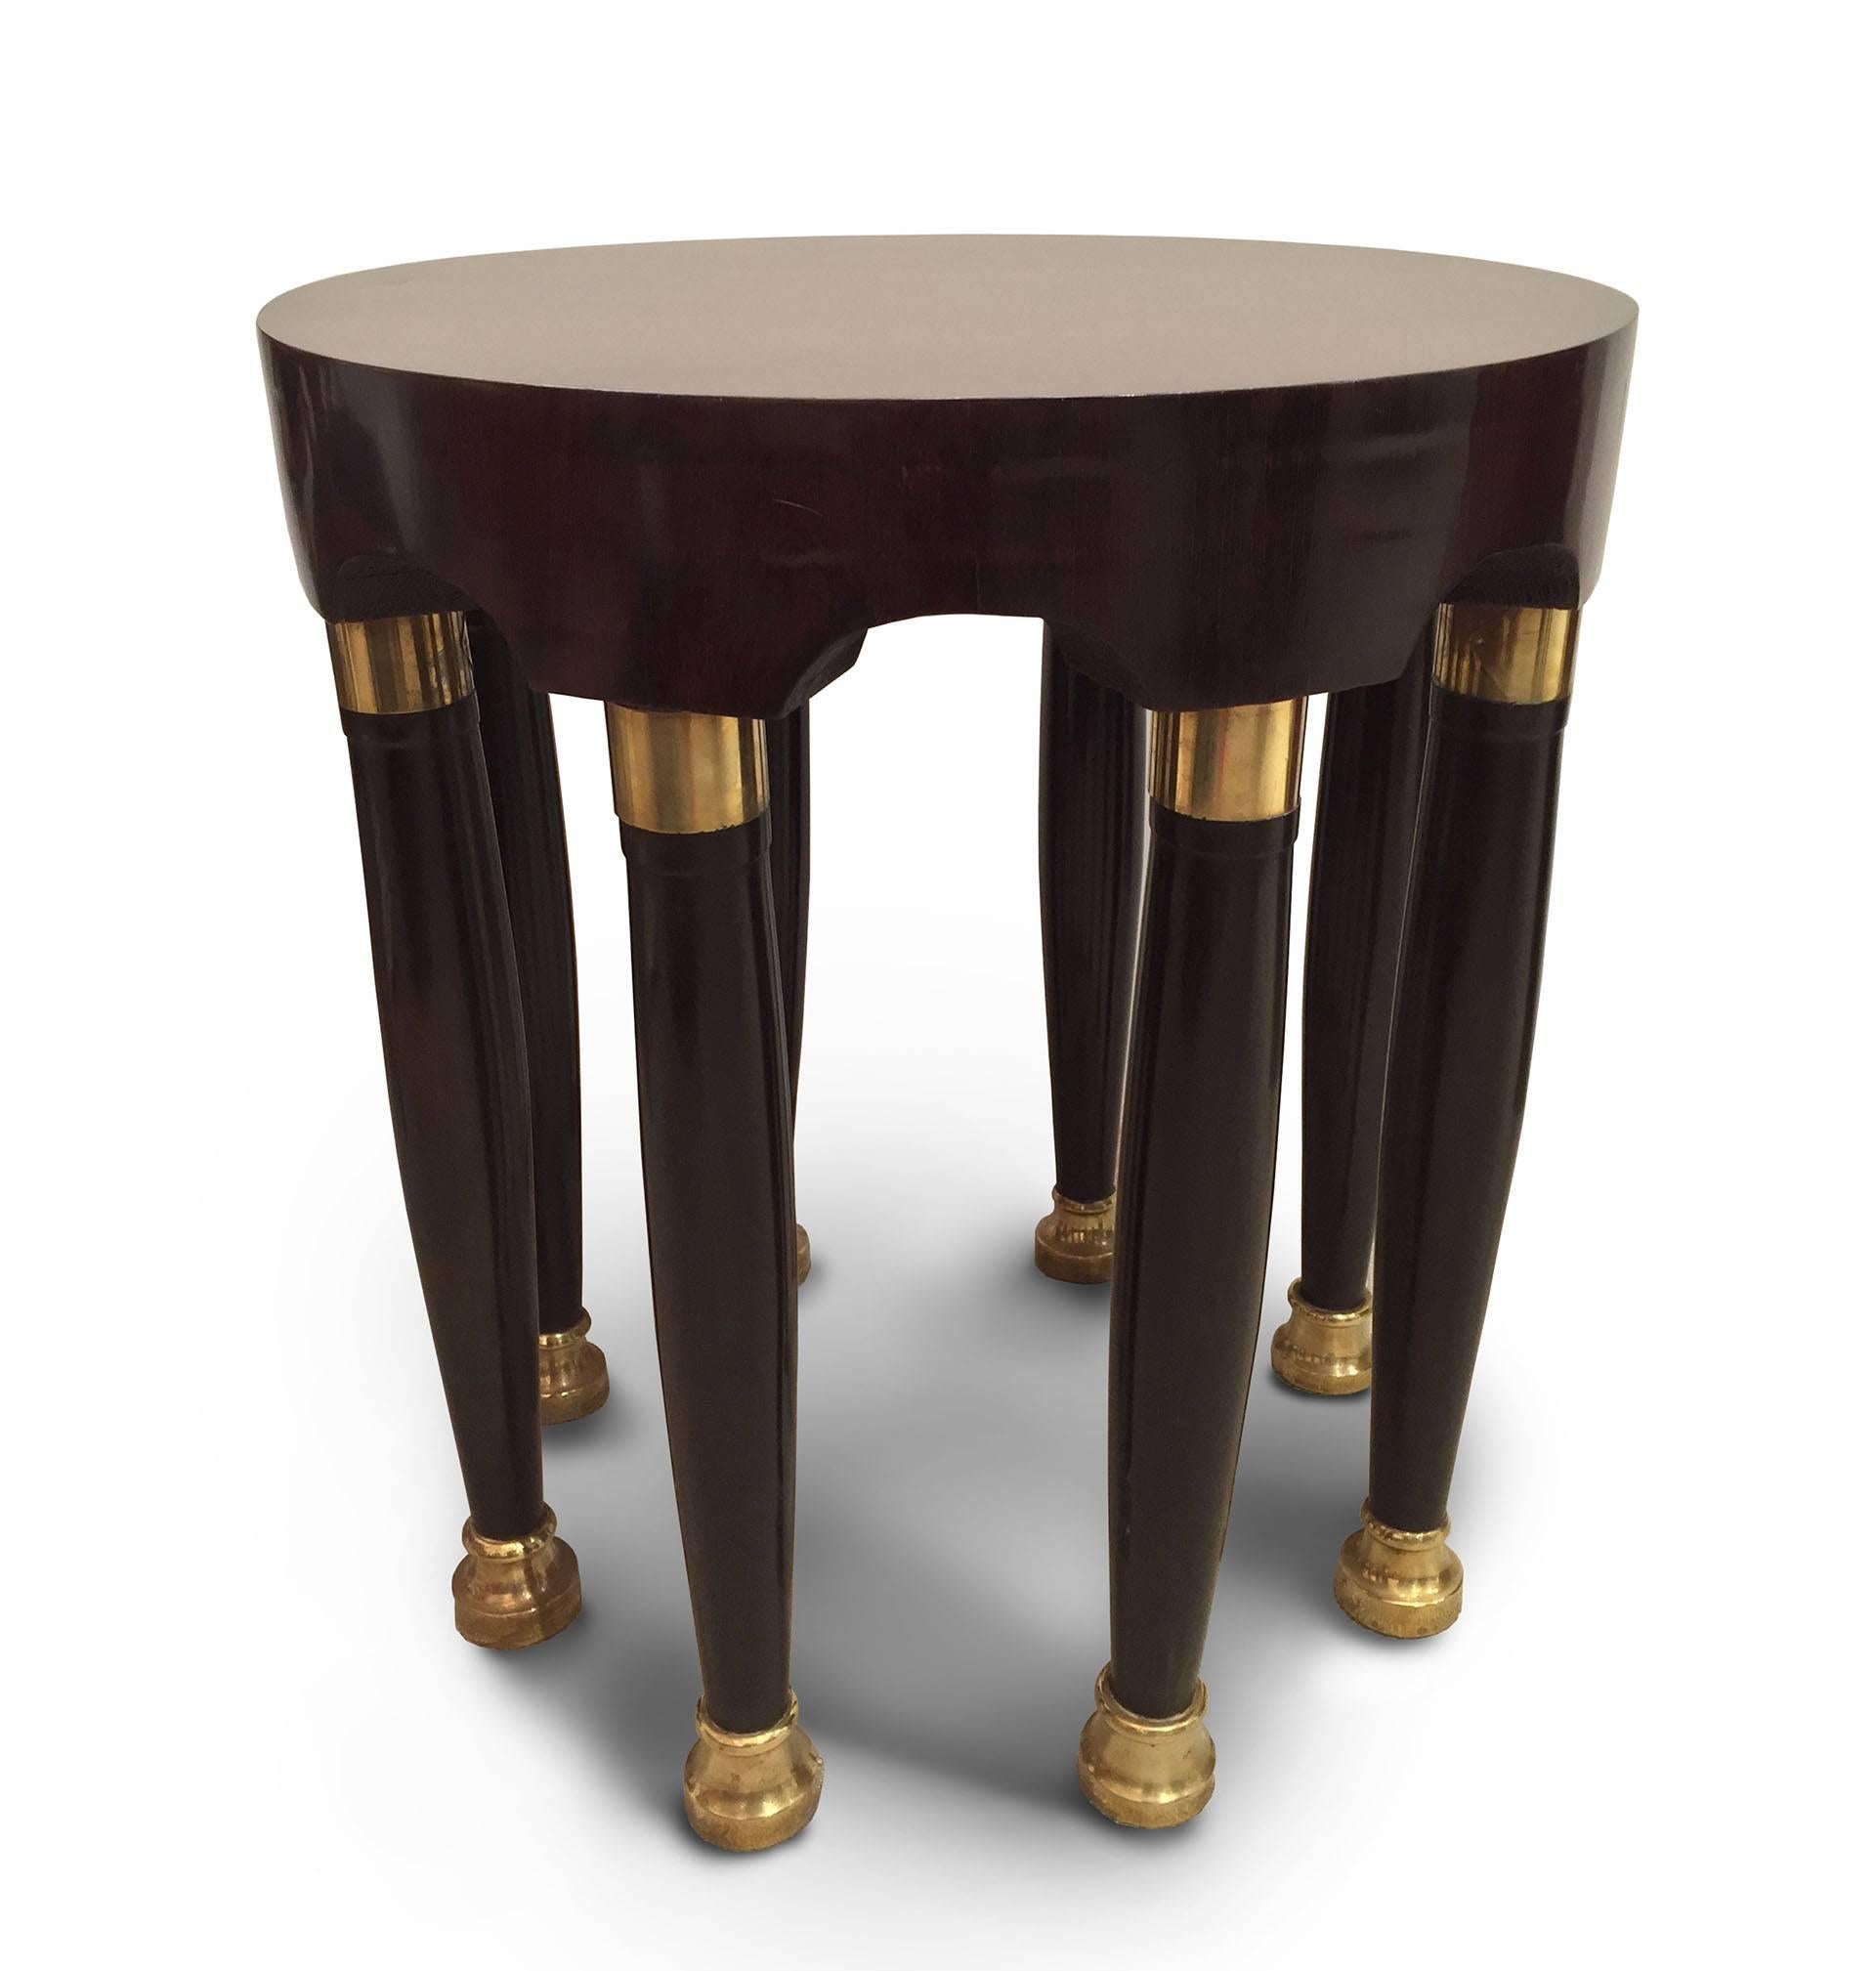 Austrian Pair of 1940s Continental Art Deco Round Gilt Trimmed Mahogany End Tables